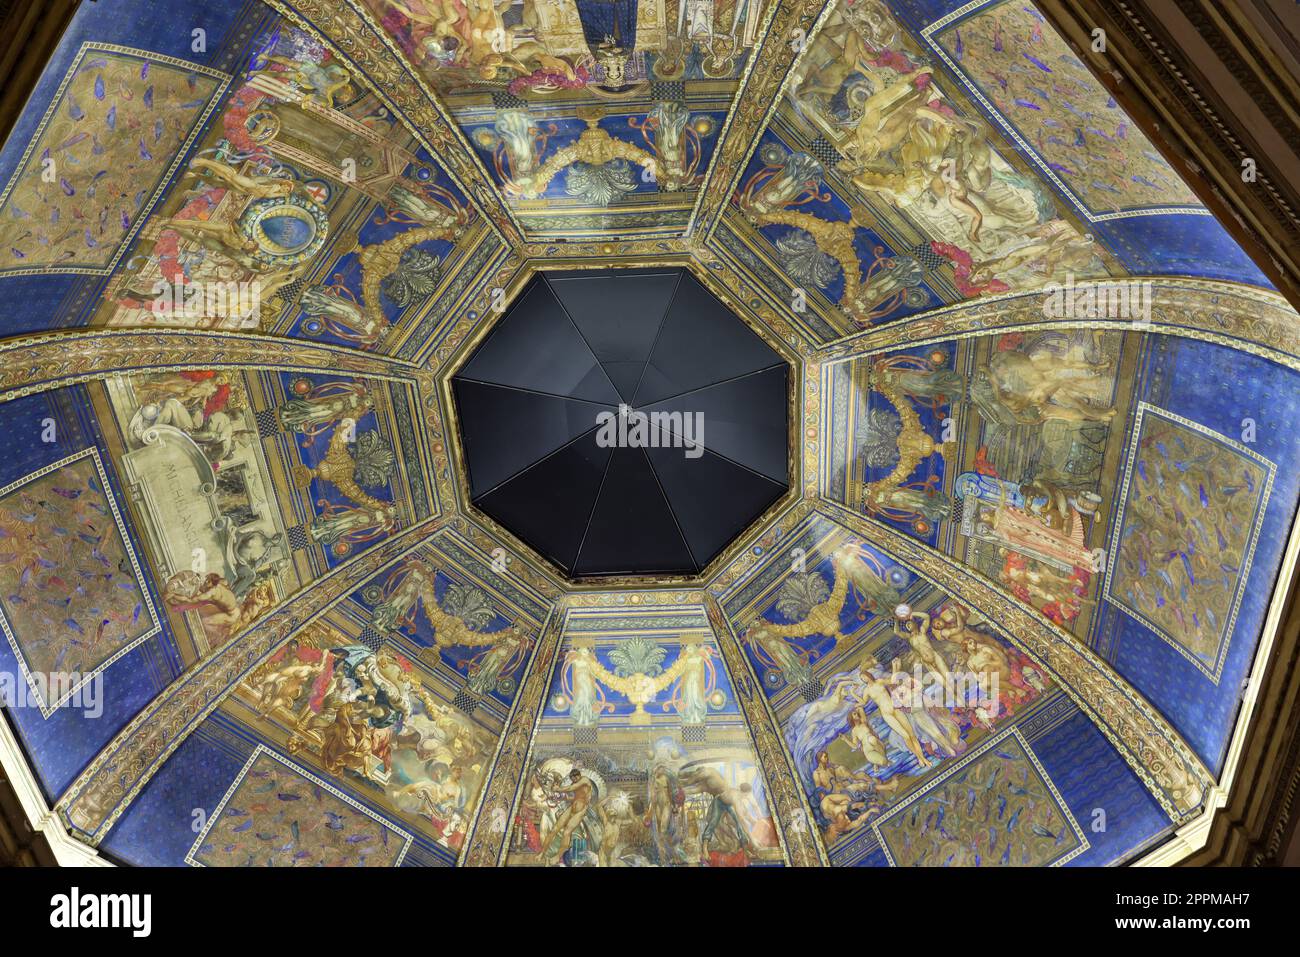 Decorated ceiling of the Biennale Central Pavilion located in Giardini in Venice. Italy Stock Photo